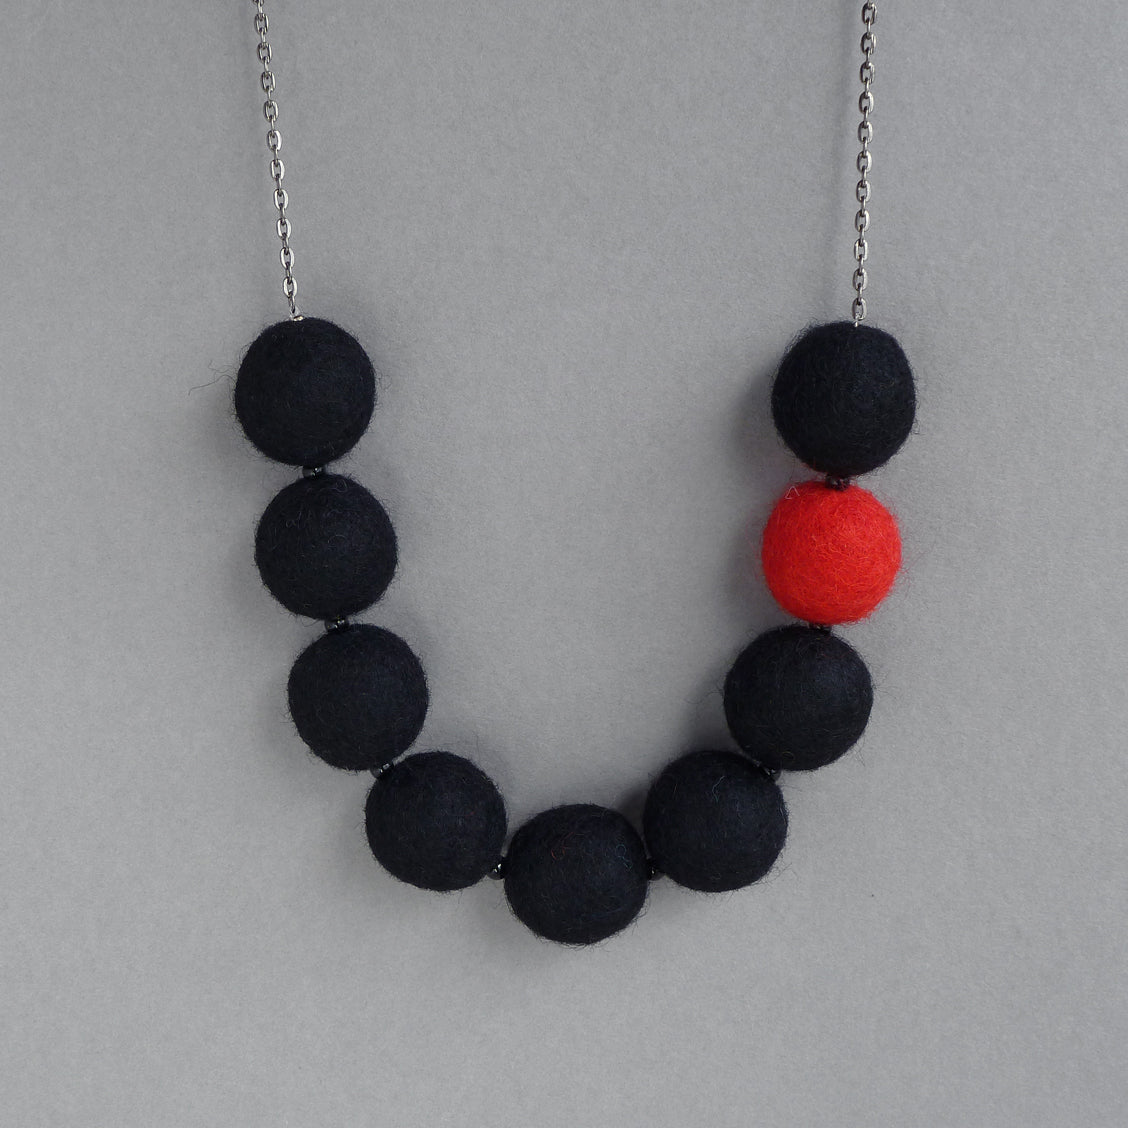 Black and red felt necklace